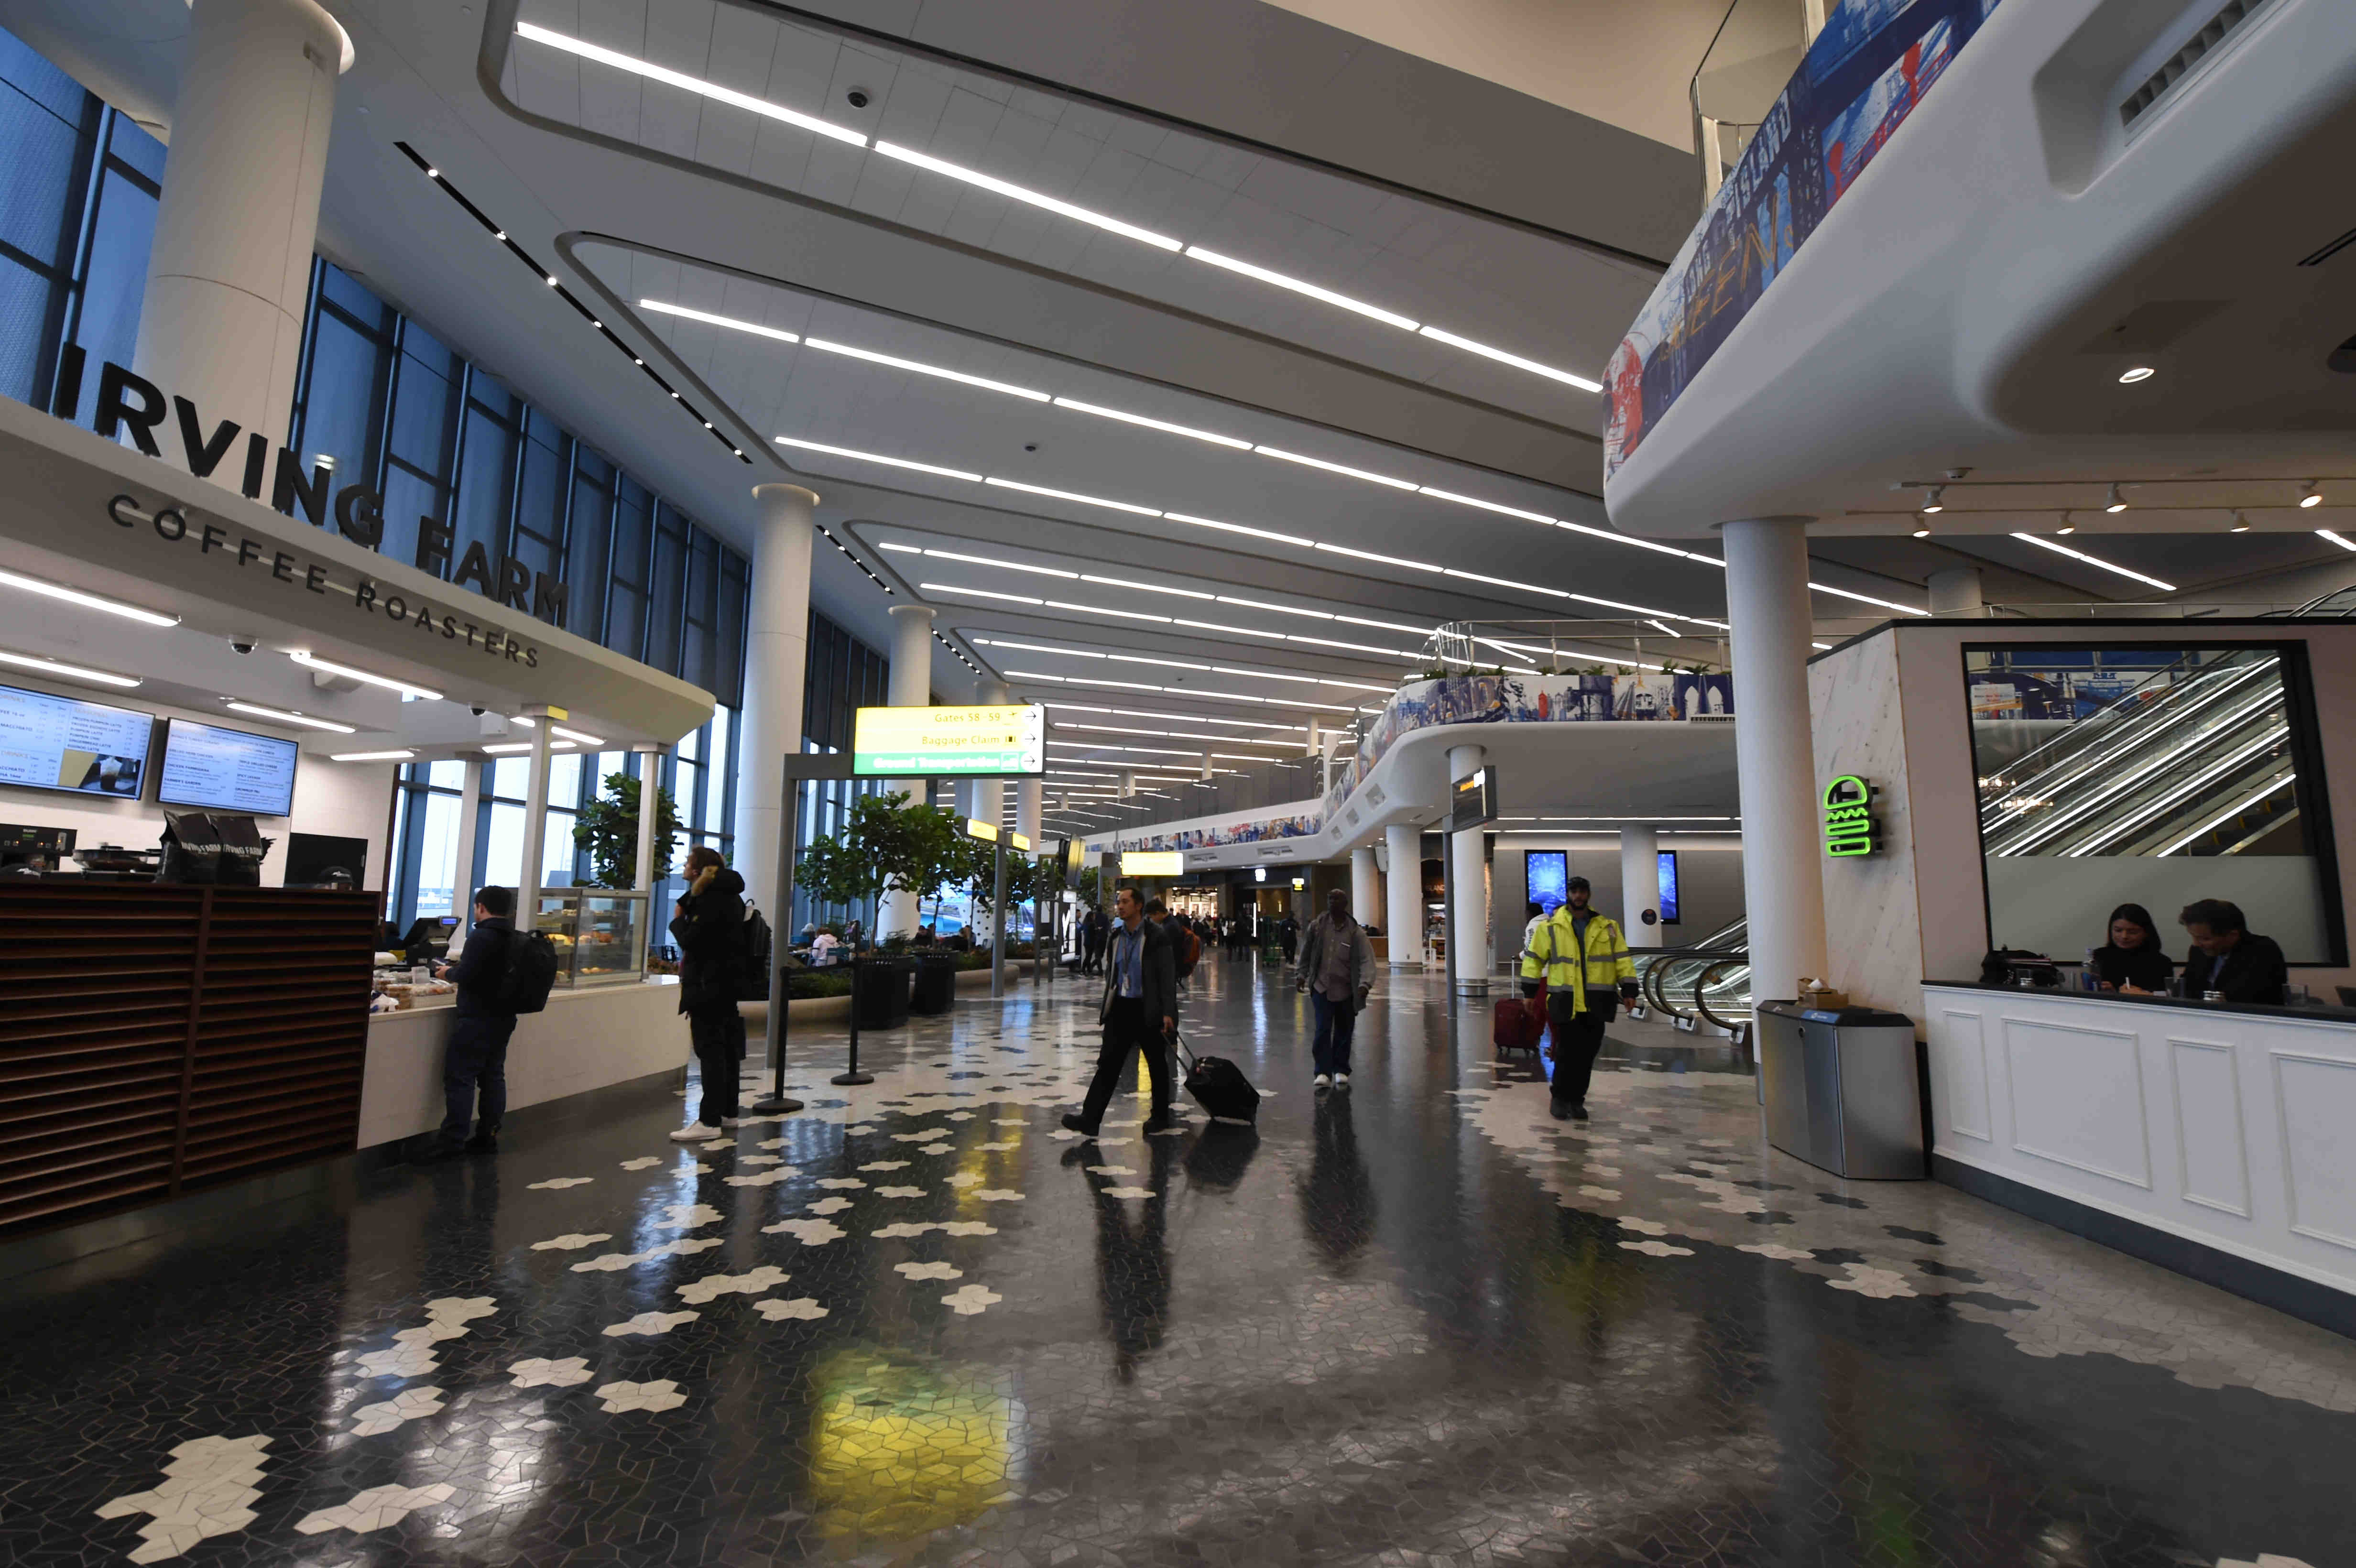 A brand new terminal B opened at LaGuardia, signaling things to come as the antiquated airport goes through a modernization transformation. Eagle photo by Todd Maisel